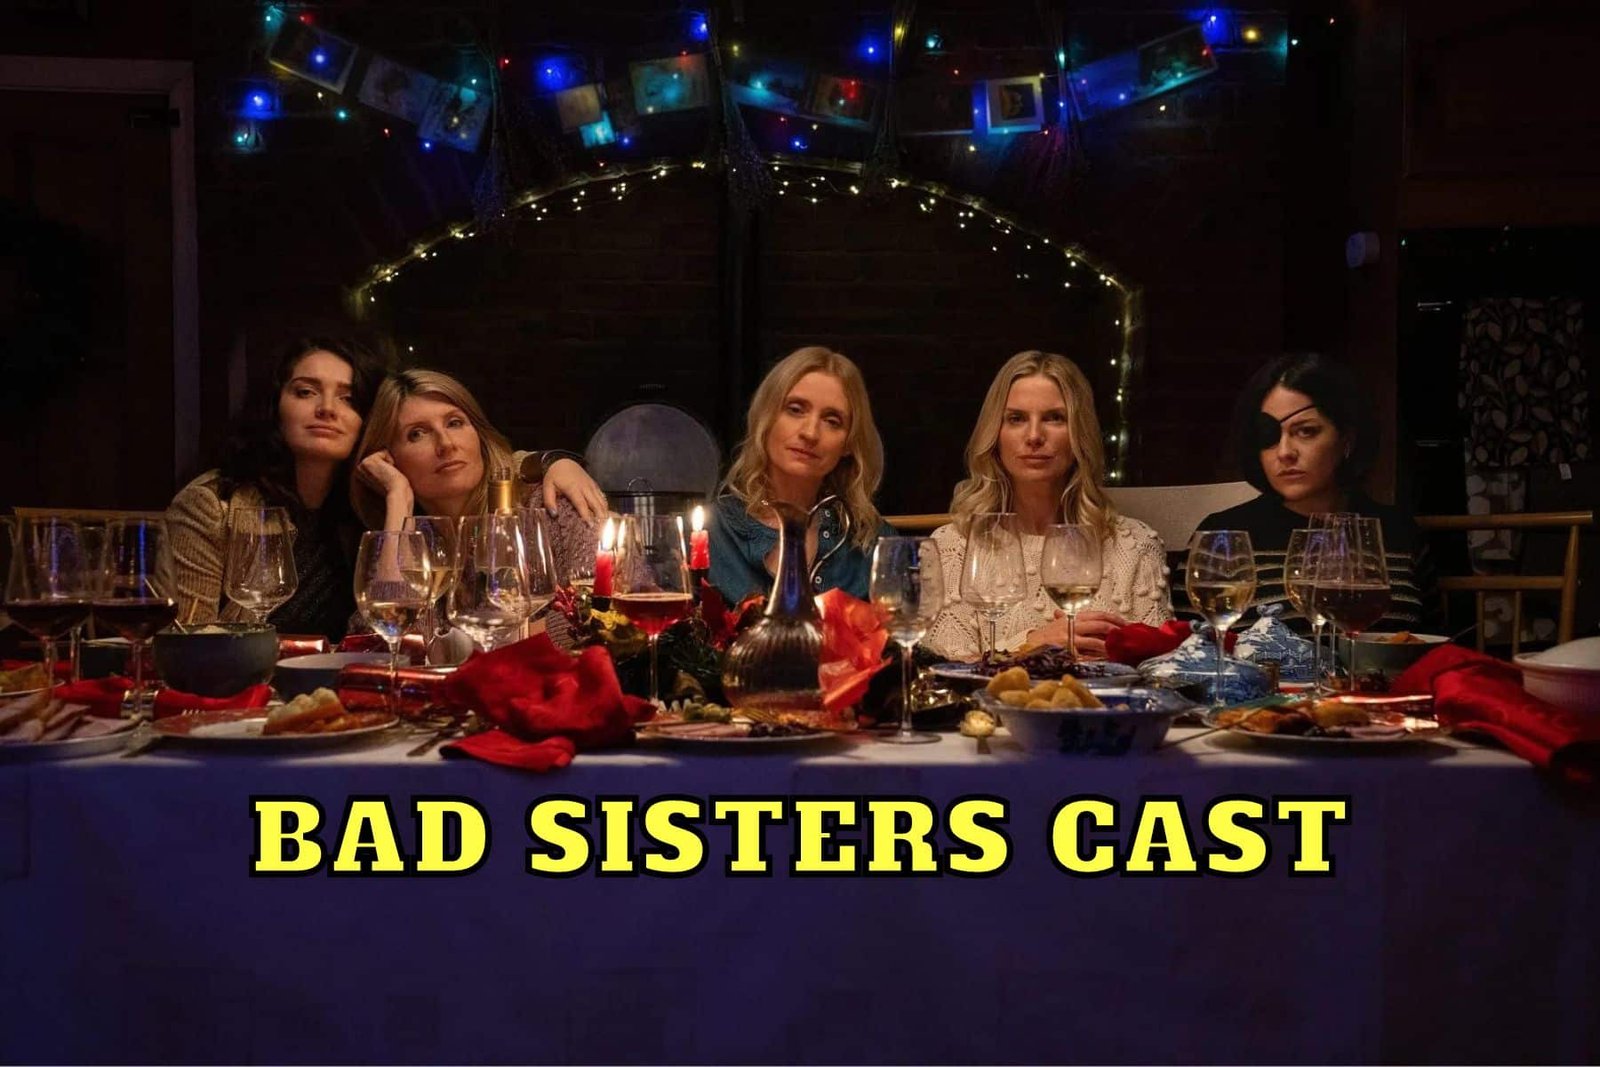 Bad Sisters Cast - Ages, Partners, Characters